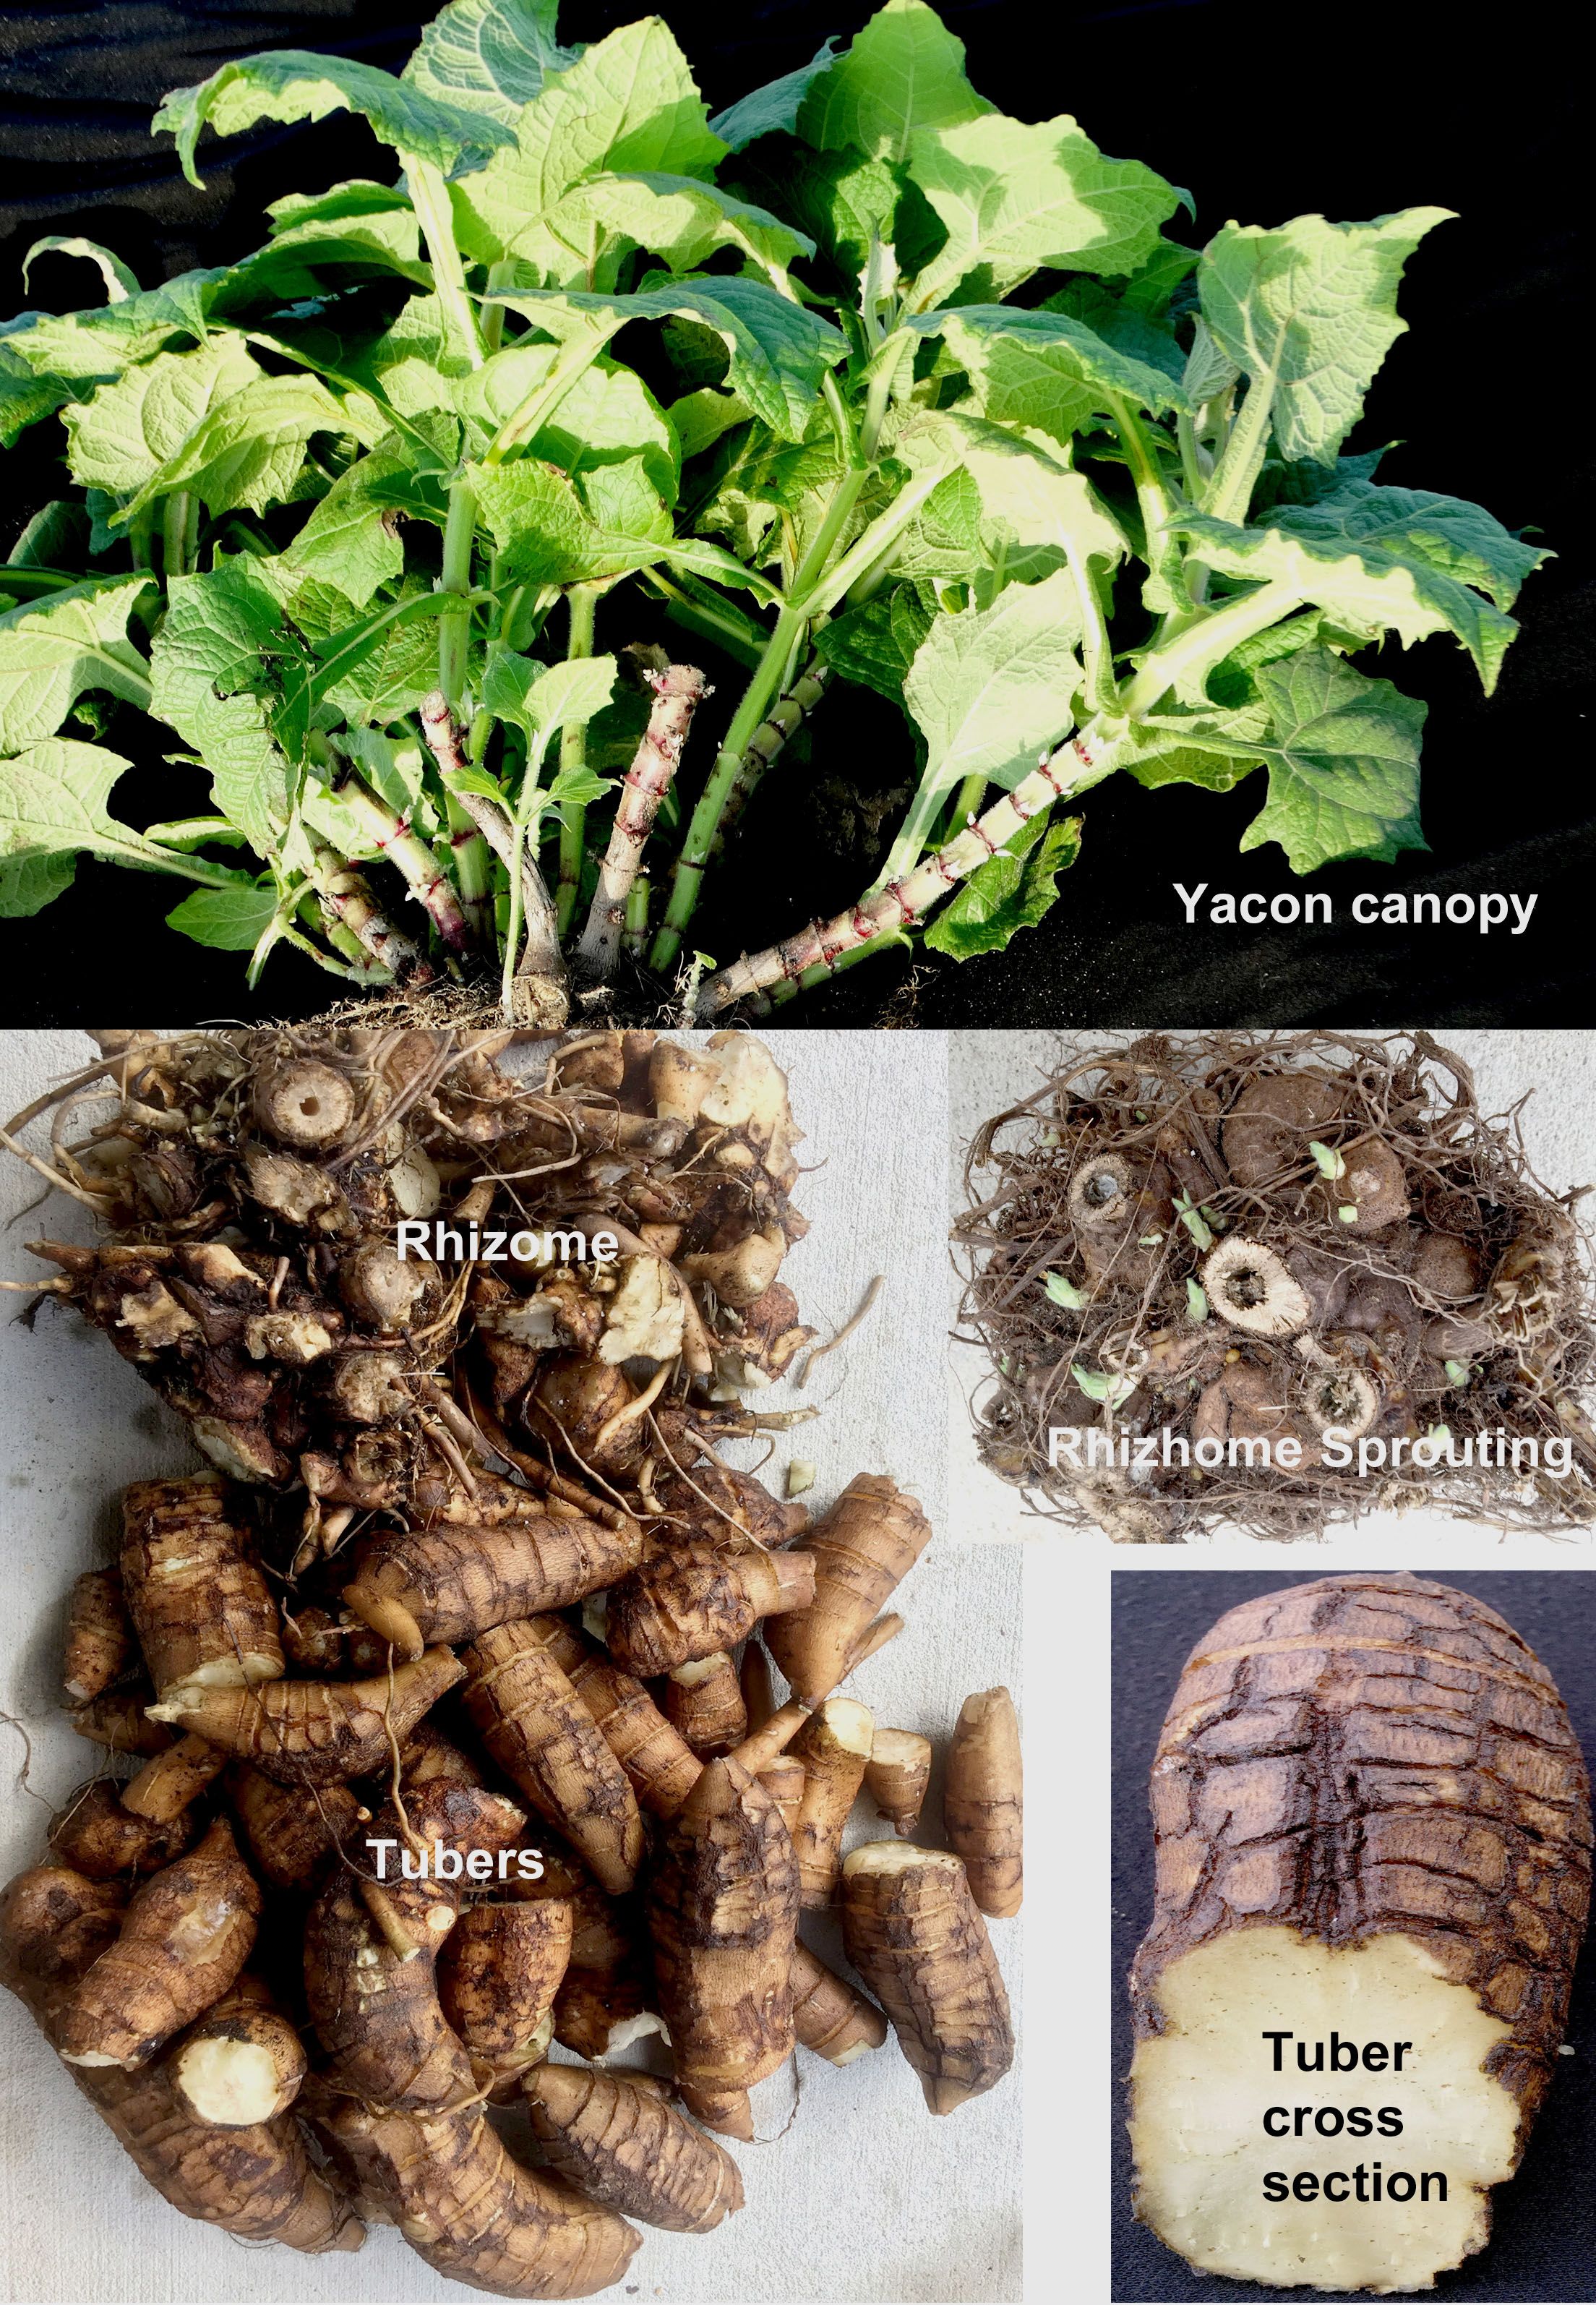 Canopy, rhizomes, rhizome sprouting, tubers, and tuber cross section of yacon plant. 